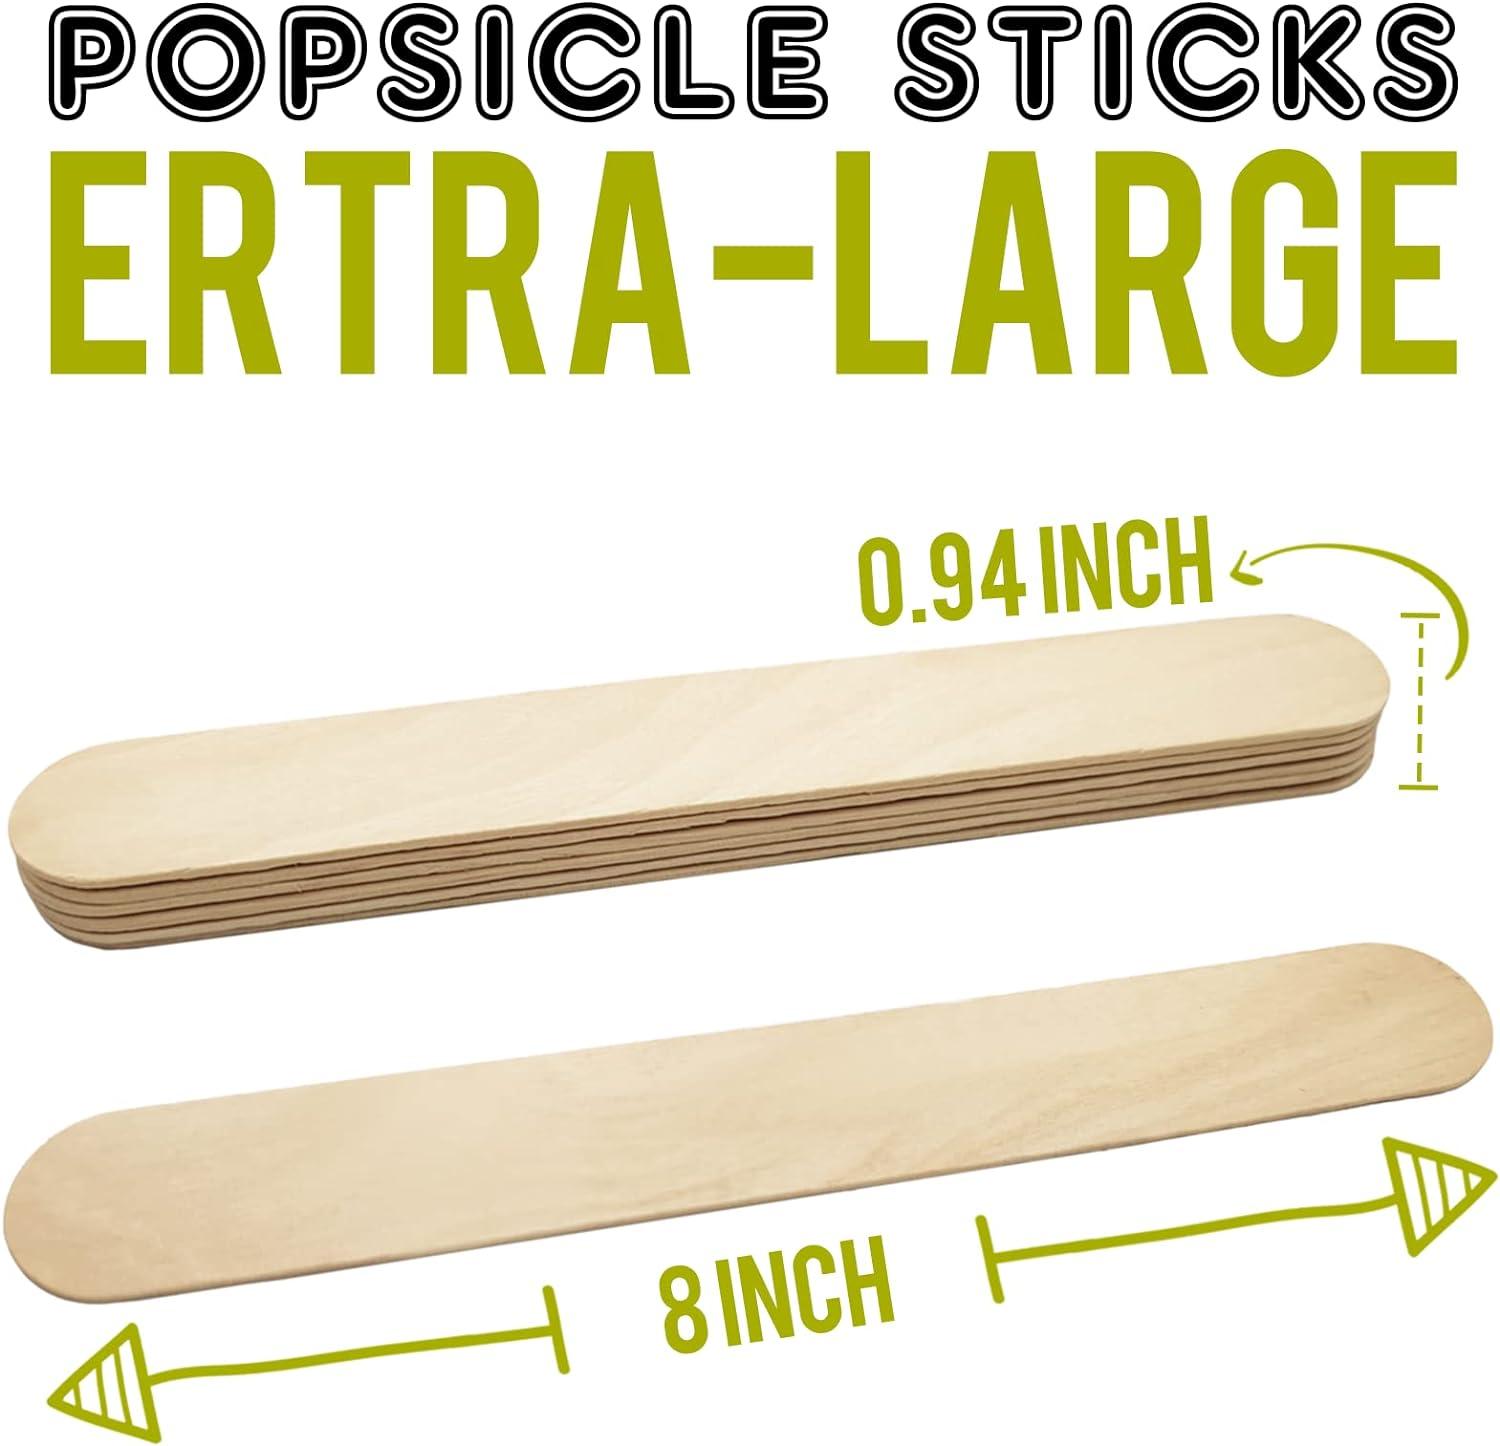  WISYOK 180 Pcs Wood Craft Sticks 5.9 Inch, Ice Cream Sticks,  Jumbo Sticks, Popsicle Sticks, Ideal for Building Model, Kids Handicraft,  and Creating Craft Projects : Arts, Crafts & Sewing